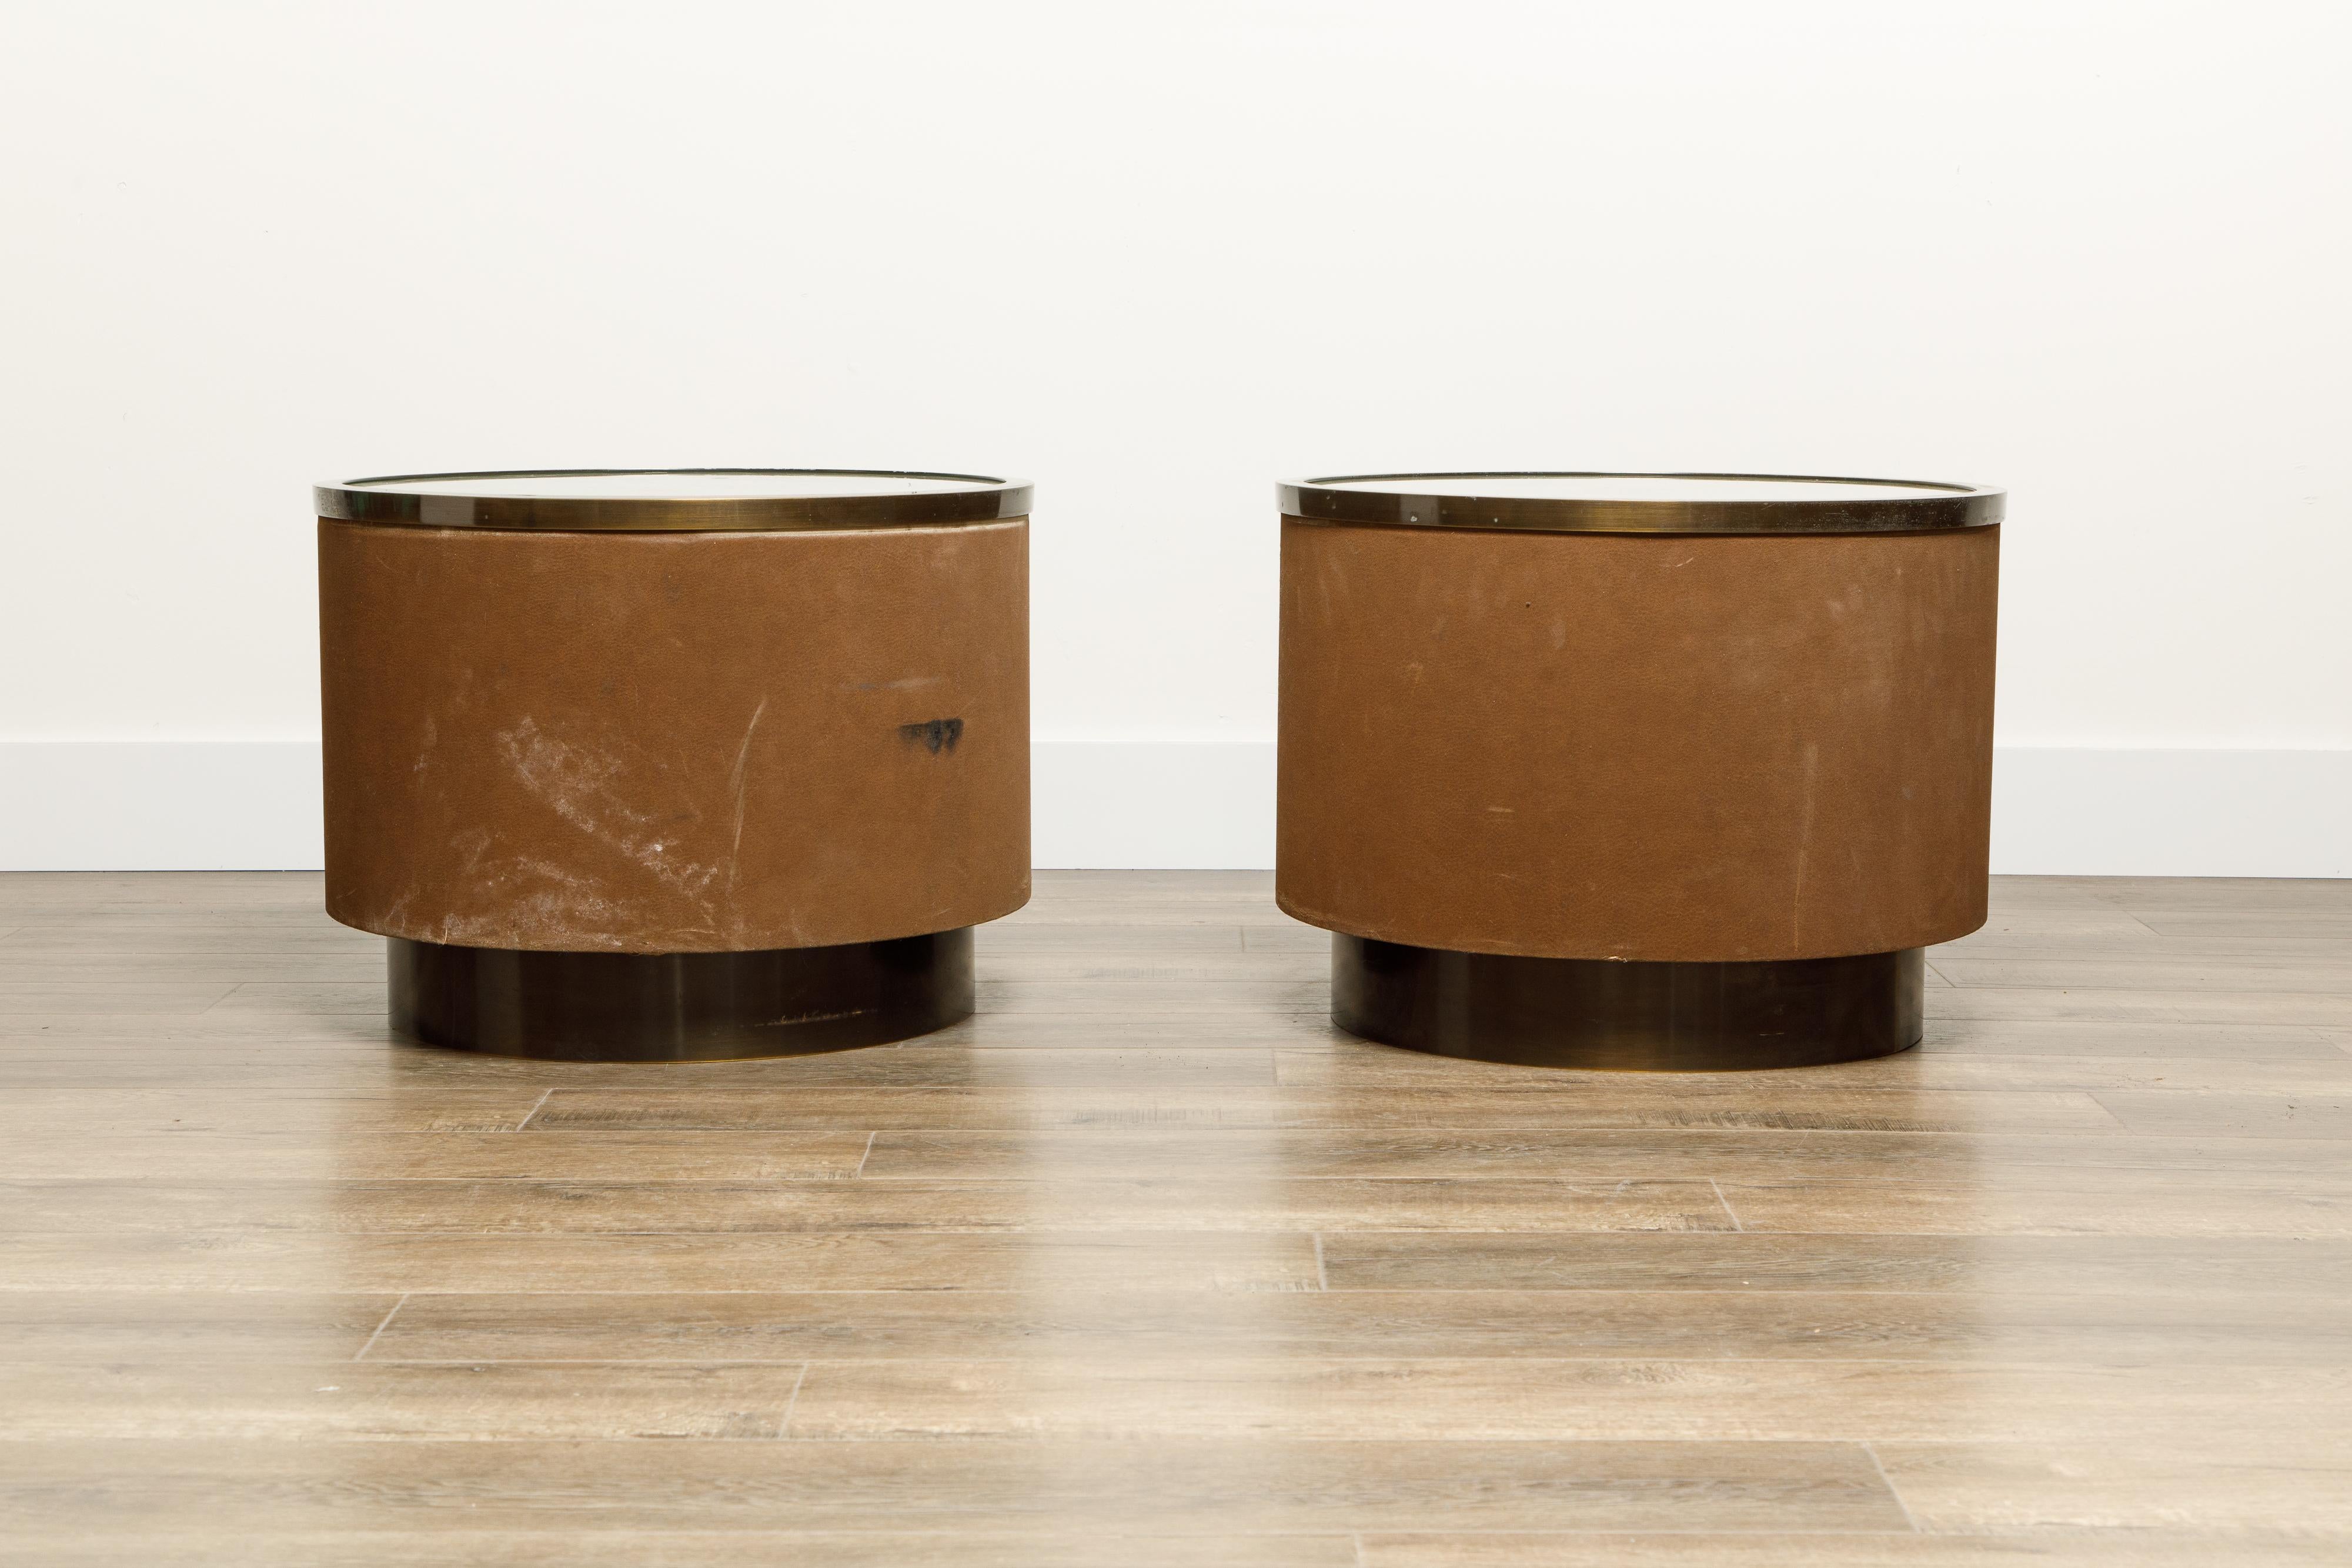 A unique pair of illuminated suede drum side tables by Steve Chase, circa 1980s. This pair of side tables came from a Steve Chase designed home and features suede leather wrapped around he cylindrical frame with metal rim and frosted glass top on